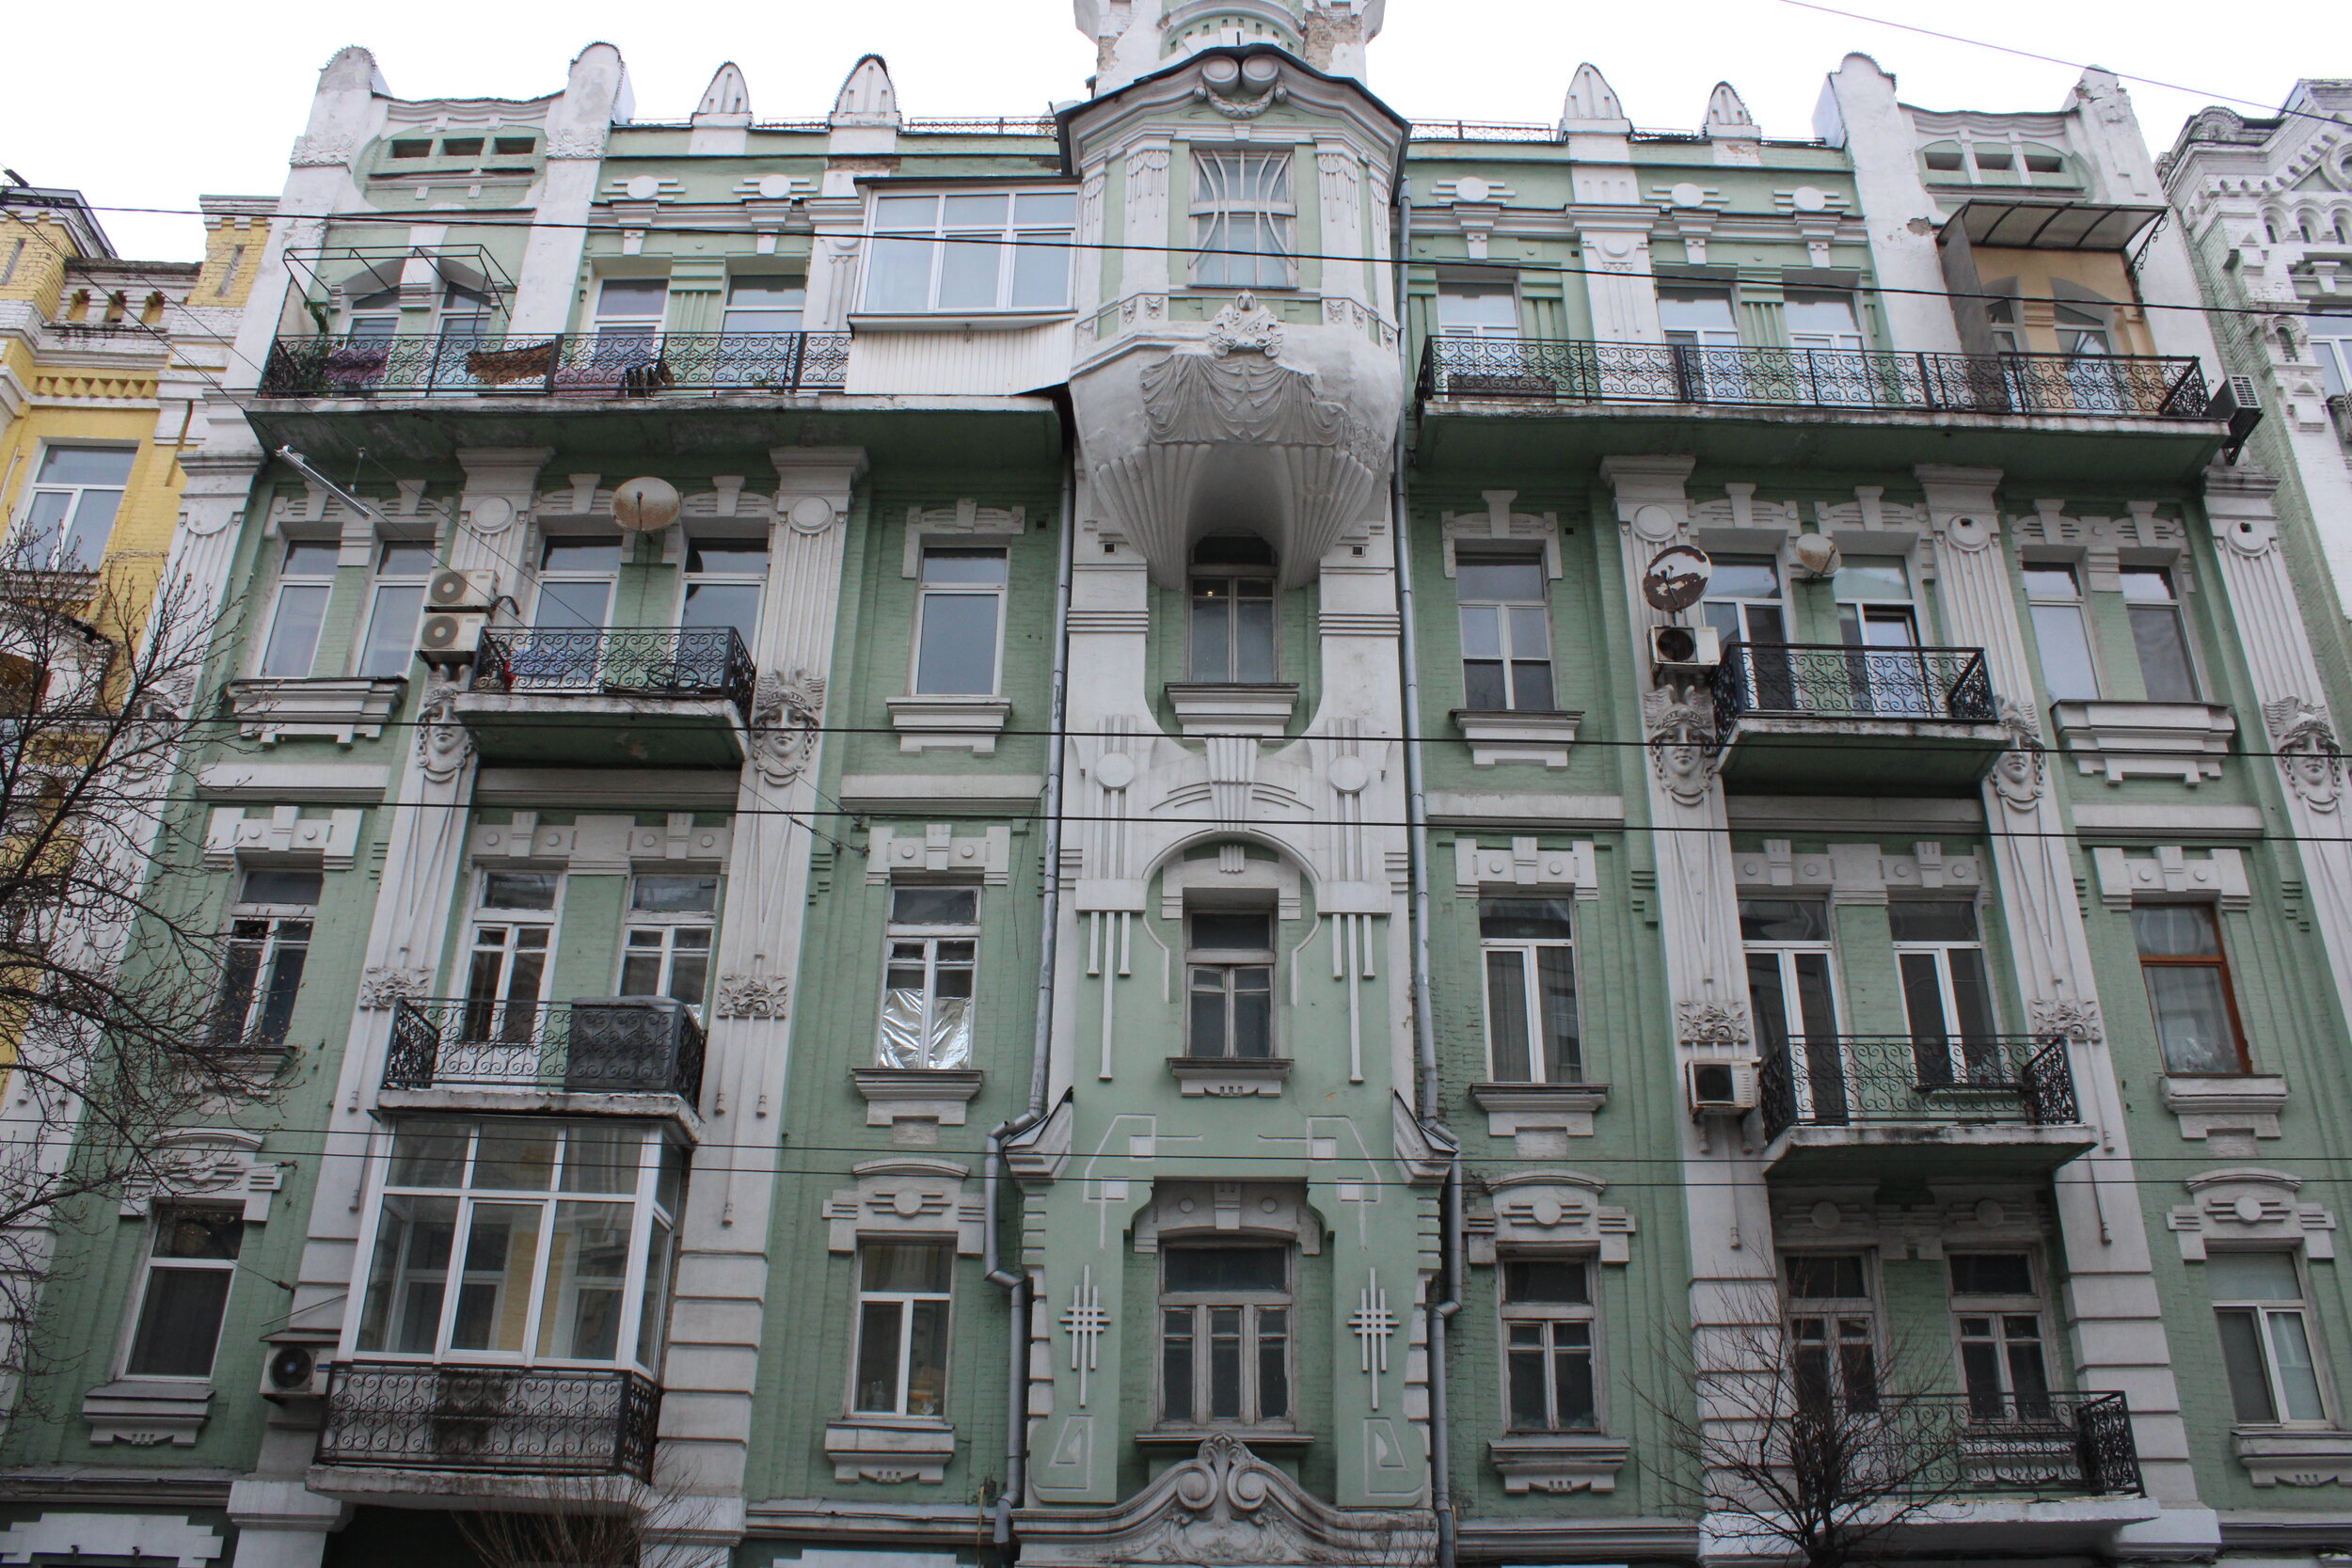   KYIV, Ukraine. April 21st. PICTURED:  The various facades and street corners containing the city’s architectural wealth. 